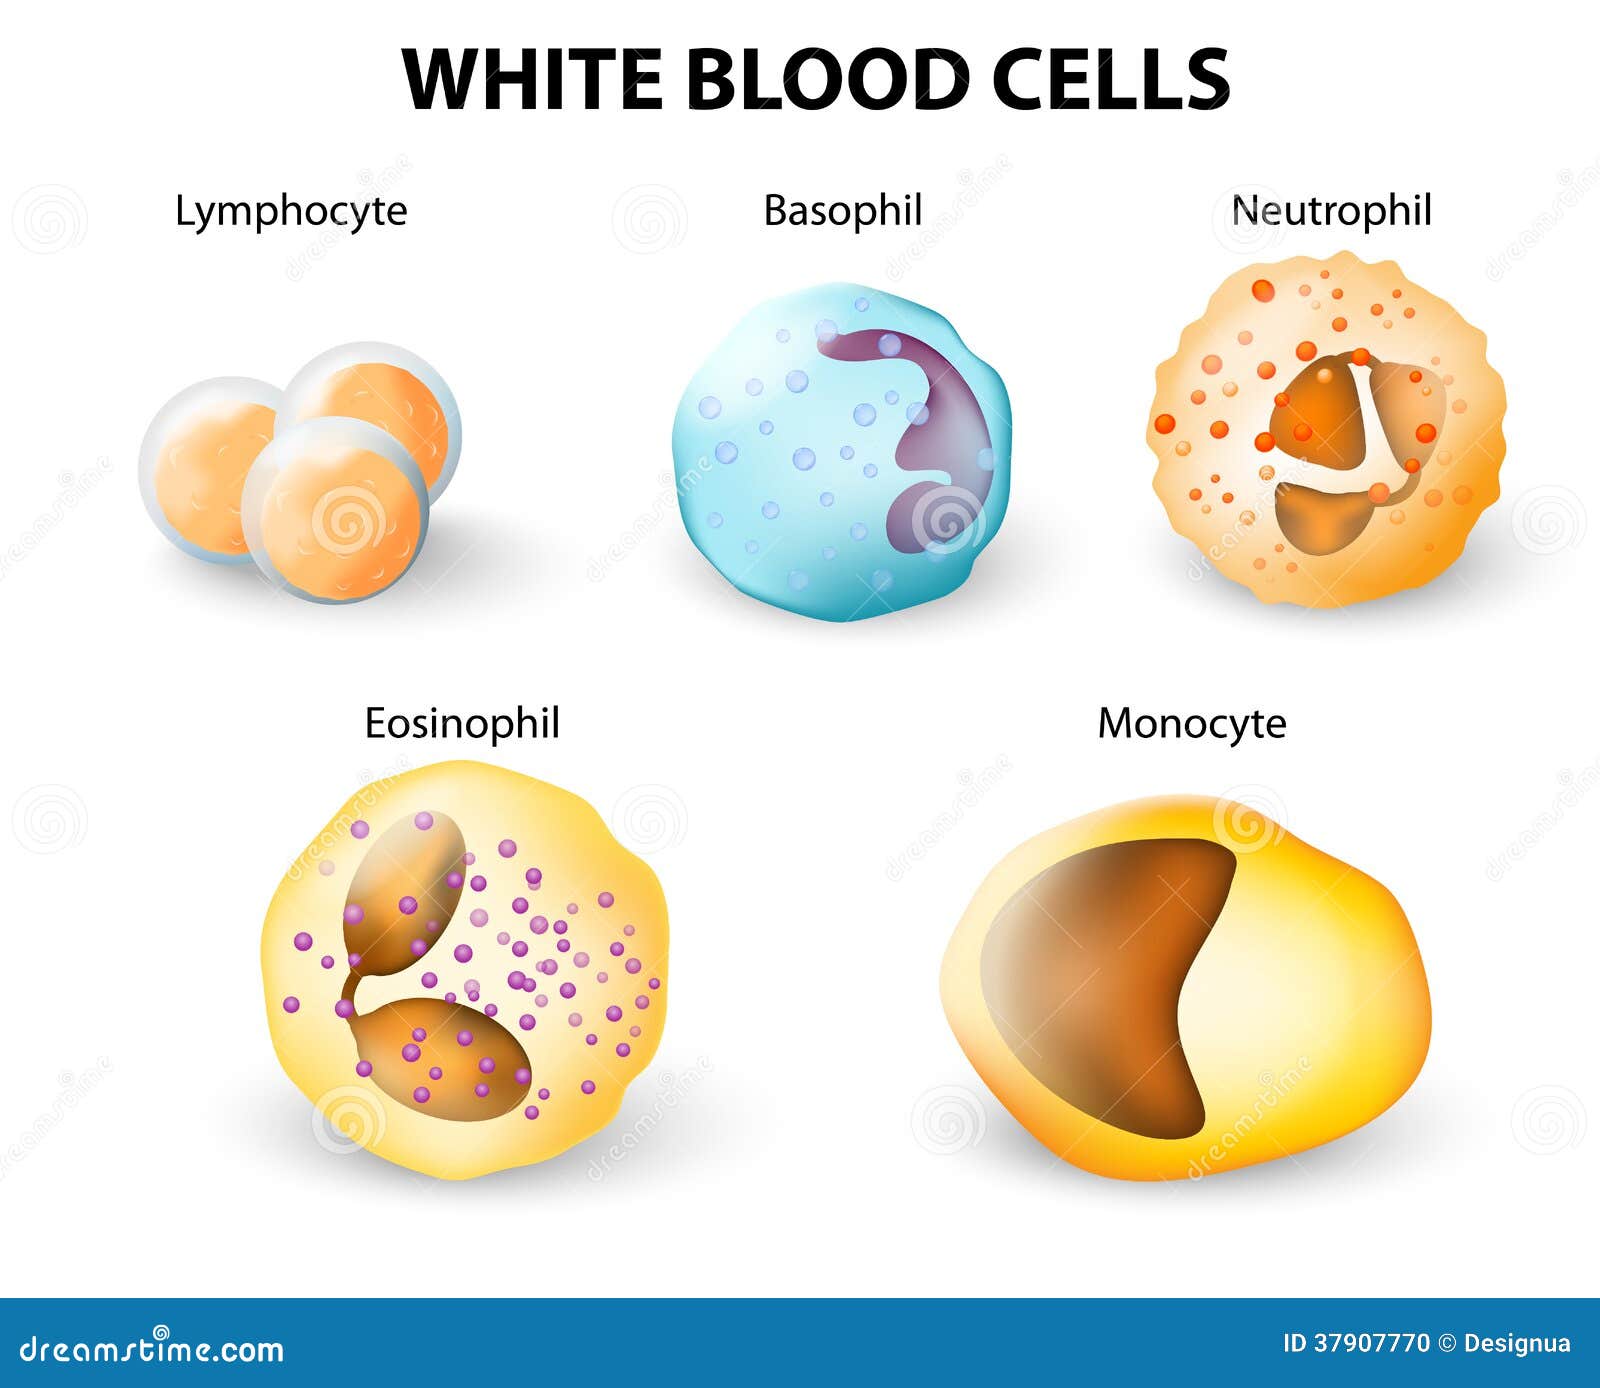 types of white blood cells